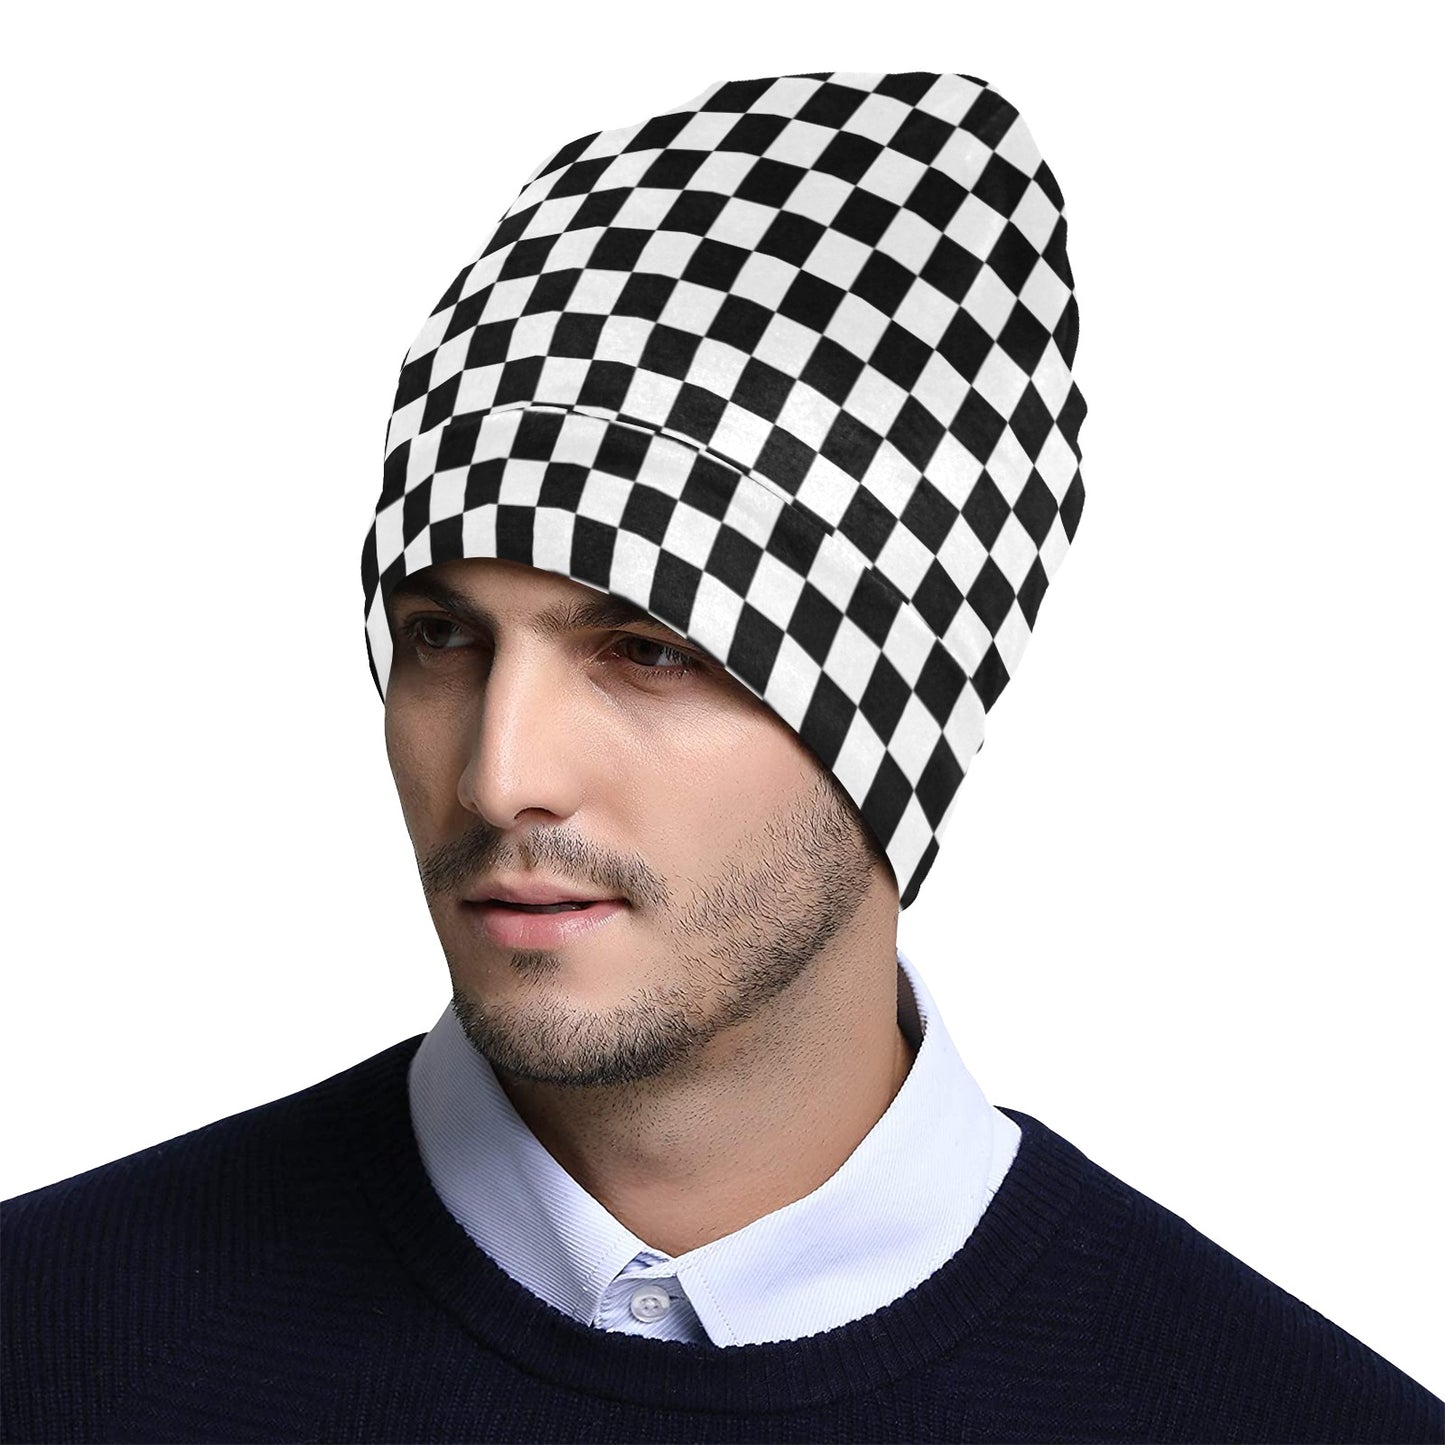 Checkered Beanie, Black White Check Checkerboard Soft Fleece Party Men Women Cute Stretchy Winter Adult Aesthetic Cap Hat Gift